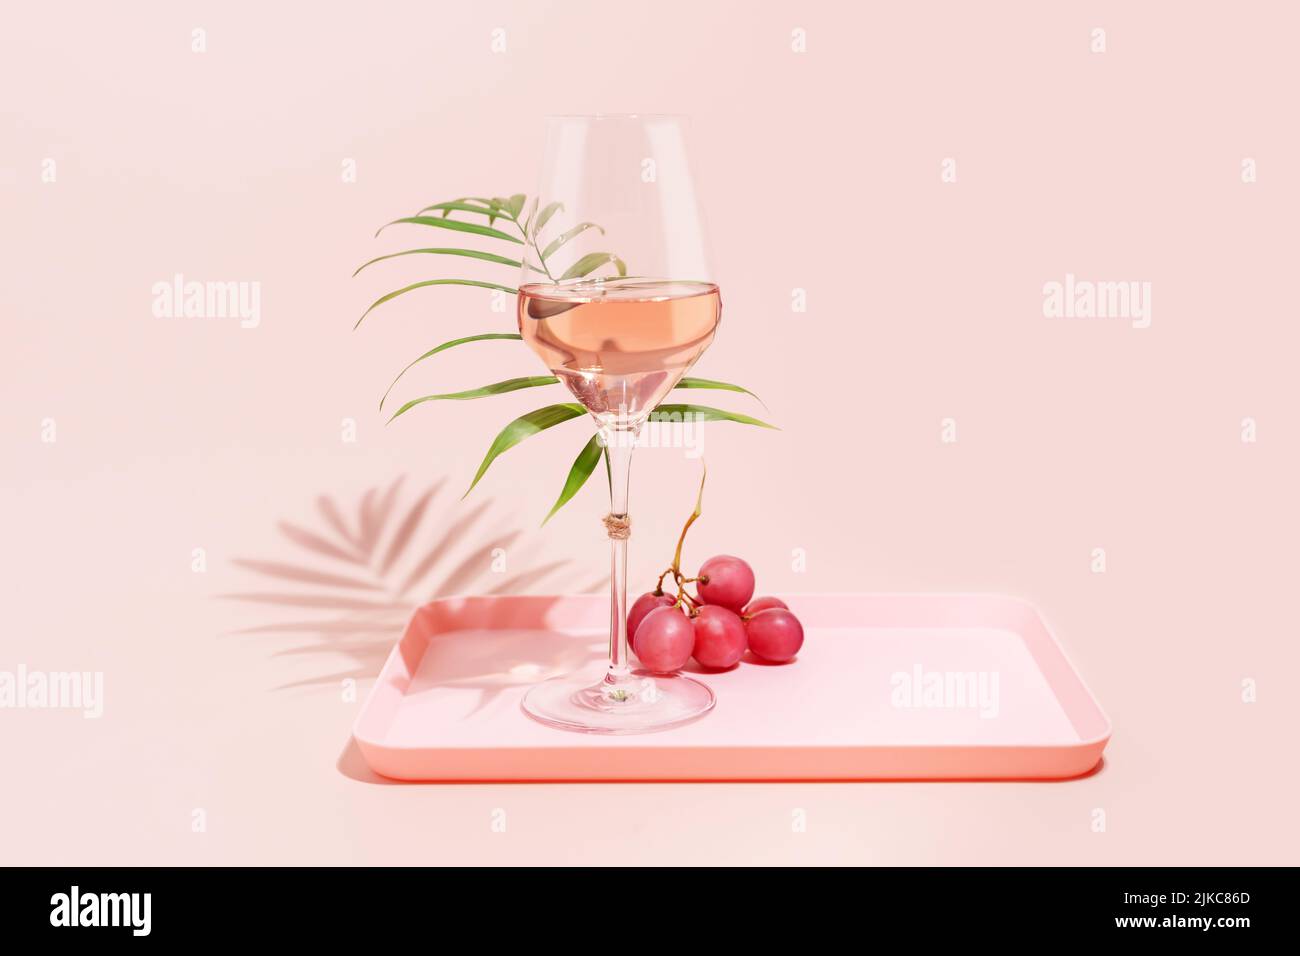 Rose wine. Minimalistic, Summer, holiday composition with glass of rose wine, grapes and palm leaf on a pink tray on a pink background. Self-partnered Stock Photo